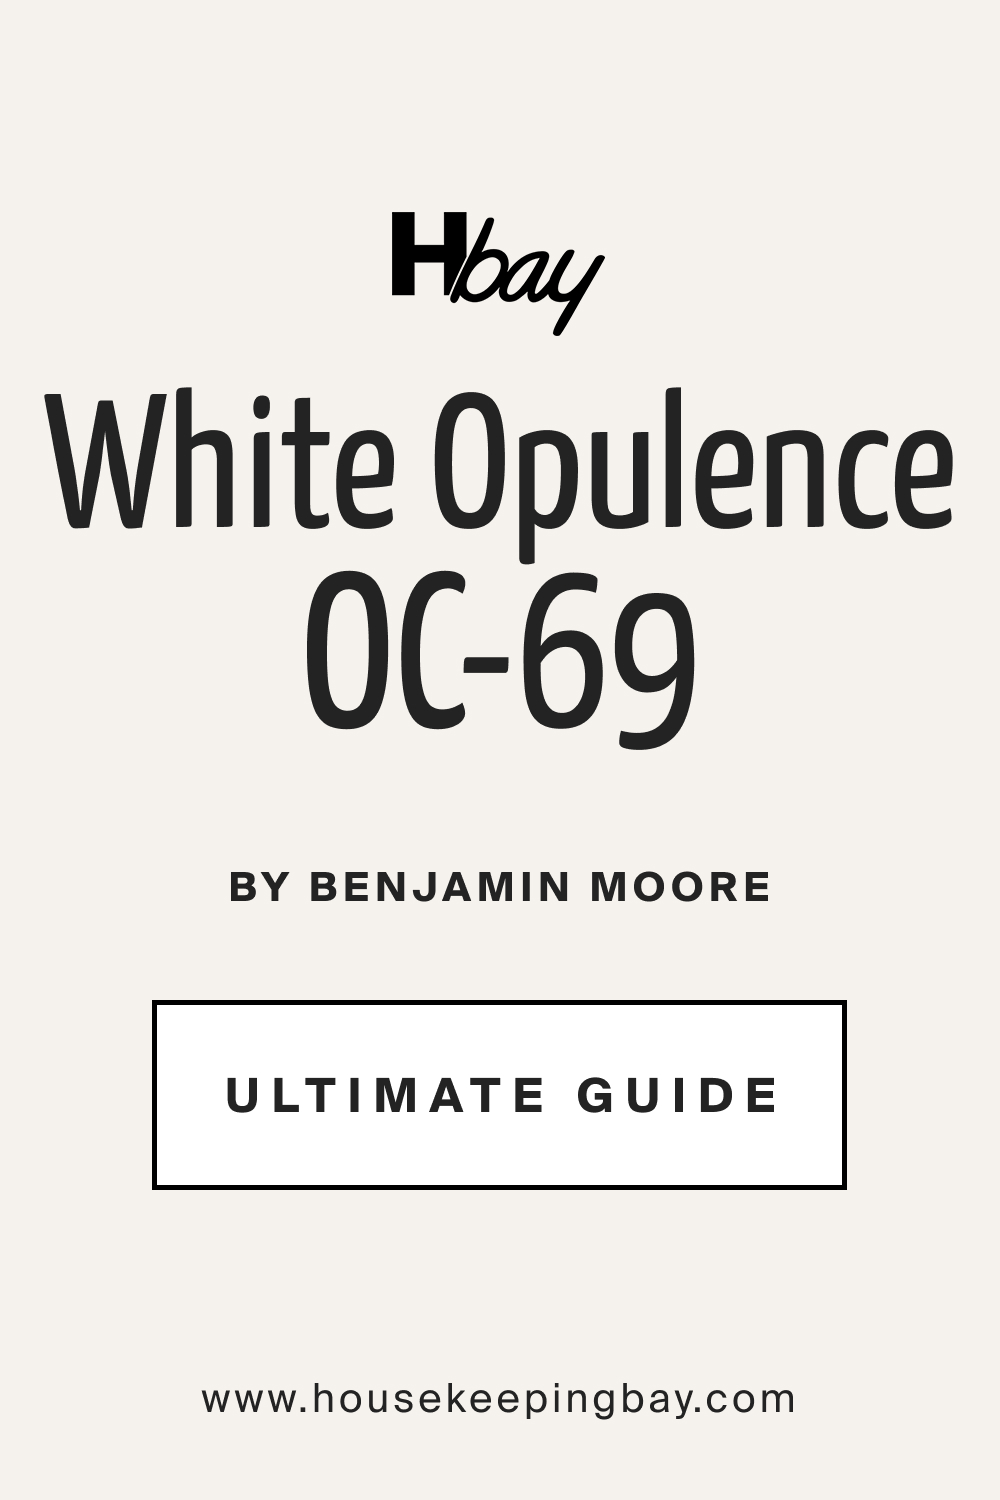 White Opulence OC 69 by Benjamin Moore Ultimate Guide